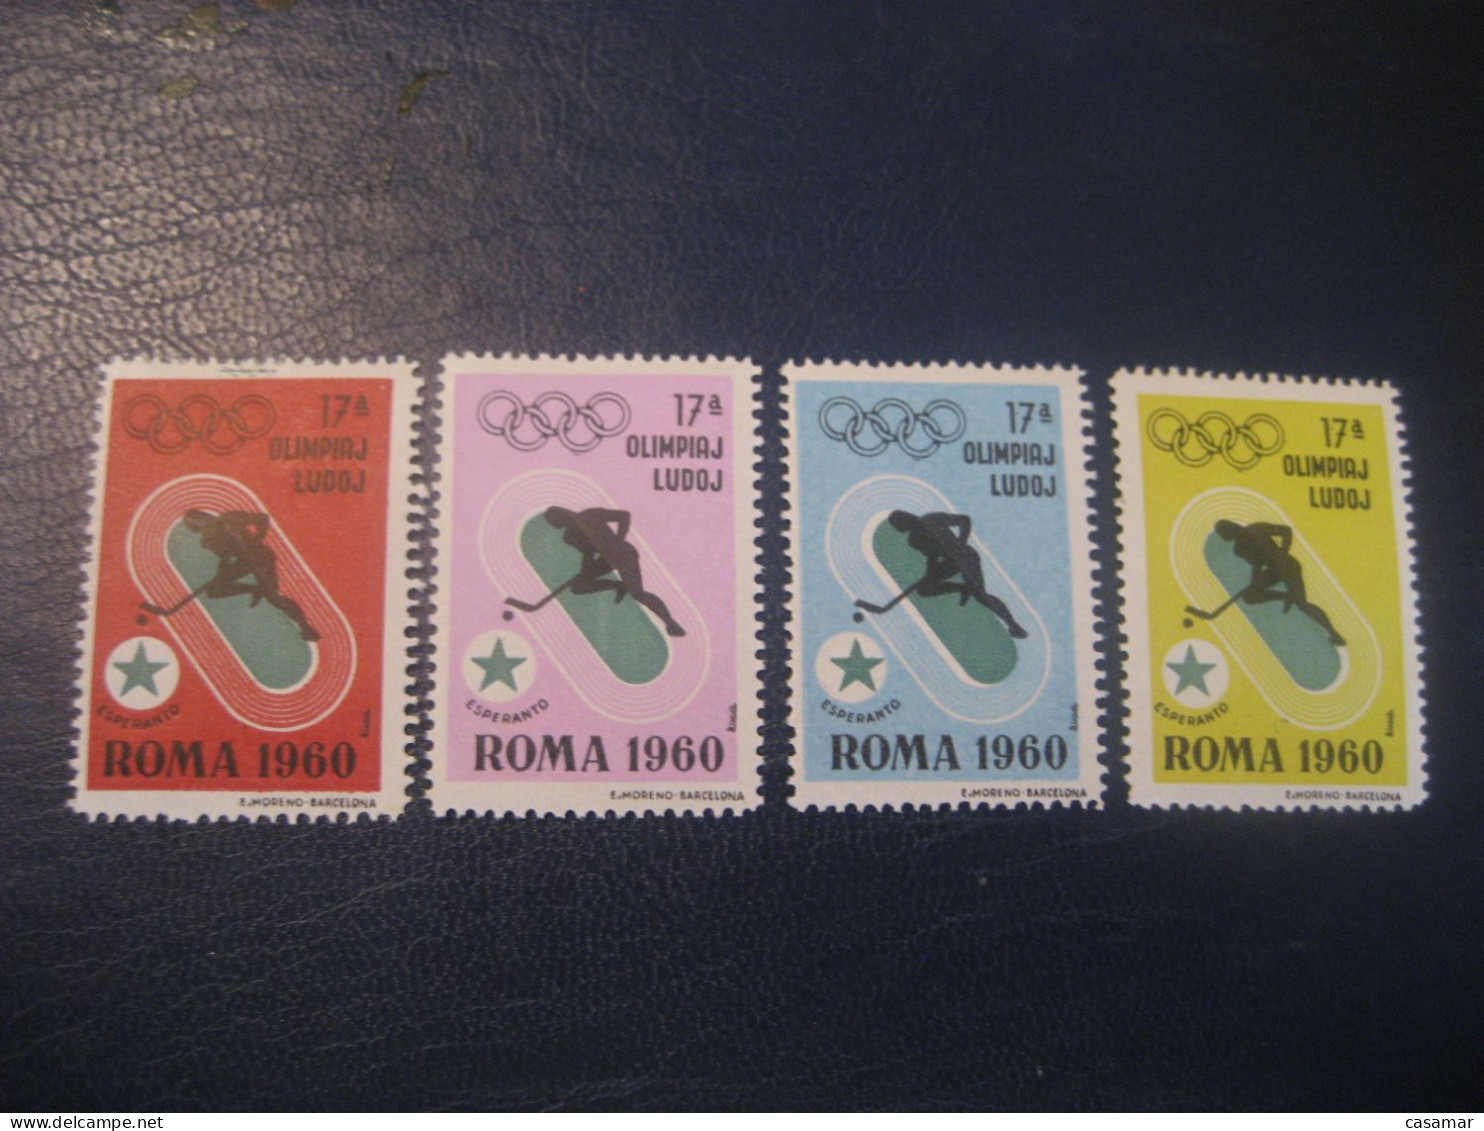 ROMA 1960 Ice Hockey Sur Glace Olympic Games Olympics Esperanto 4 Poster Stamp Vignette ITALY Spain Label - Hockey (Ice)